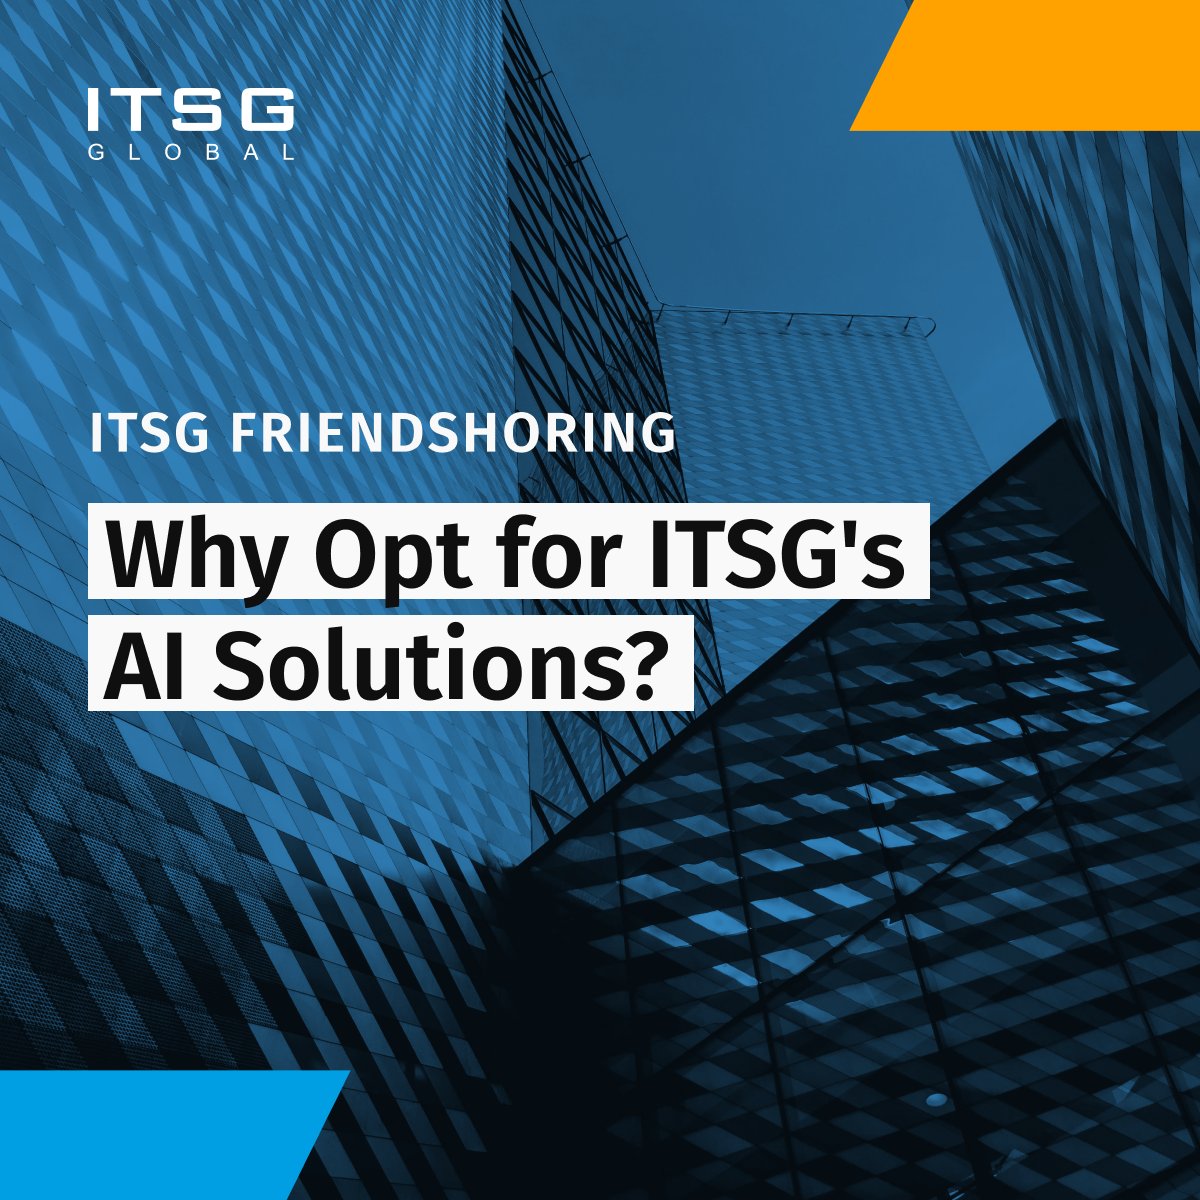 LangChain and Vector Databases Unlocked! 💥 Why Opt for ITSG's AI Solutions? 👩‍💻 Superior Language Understanding 👩‍💻 Tailored AI Strategies 👩‍💻 Edge in Innovation Learn more: itsg-global.com/solutions/tale… 👈 #ITSG #NextGenAI #LangChainTechnology #VectorDatabases #AIAdvancement